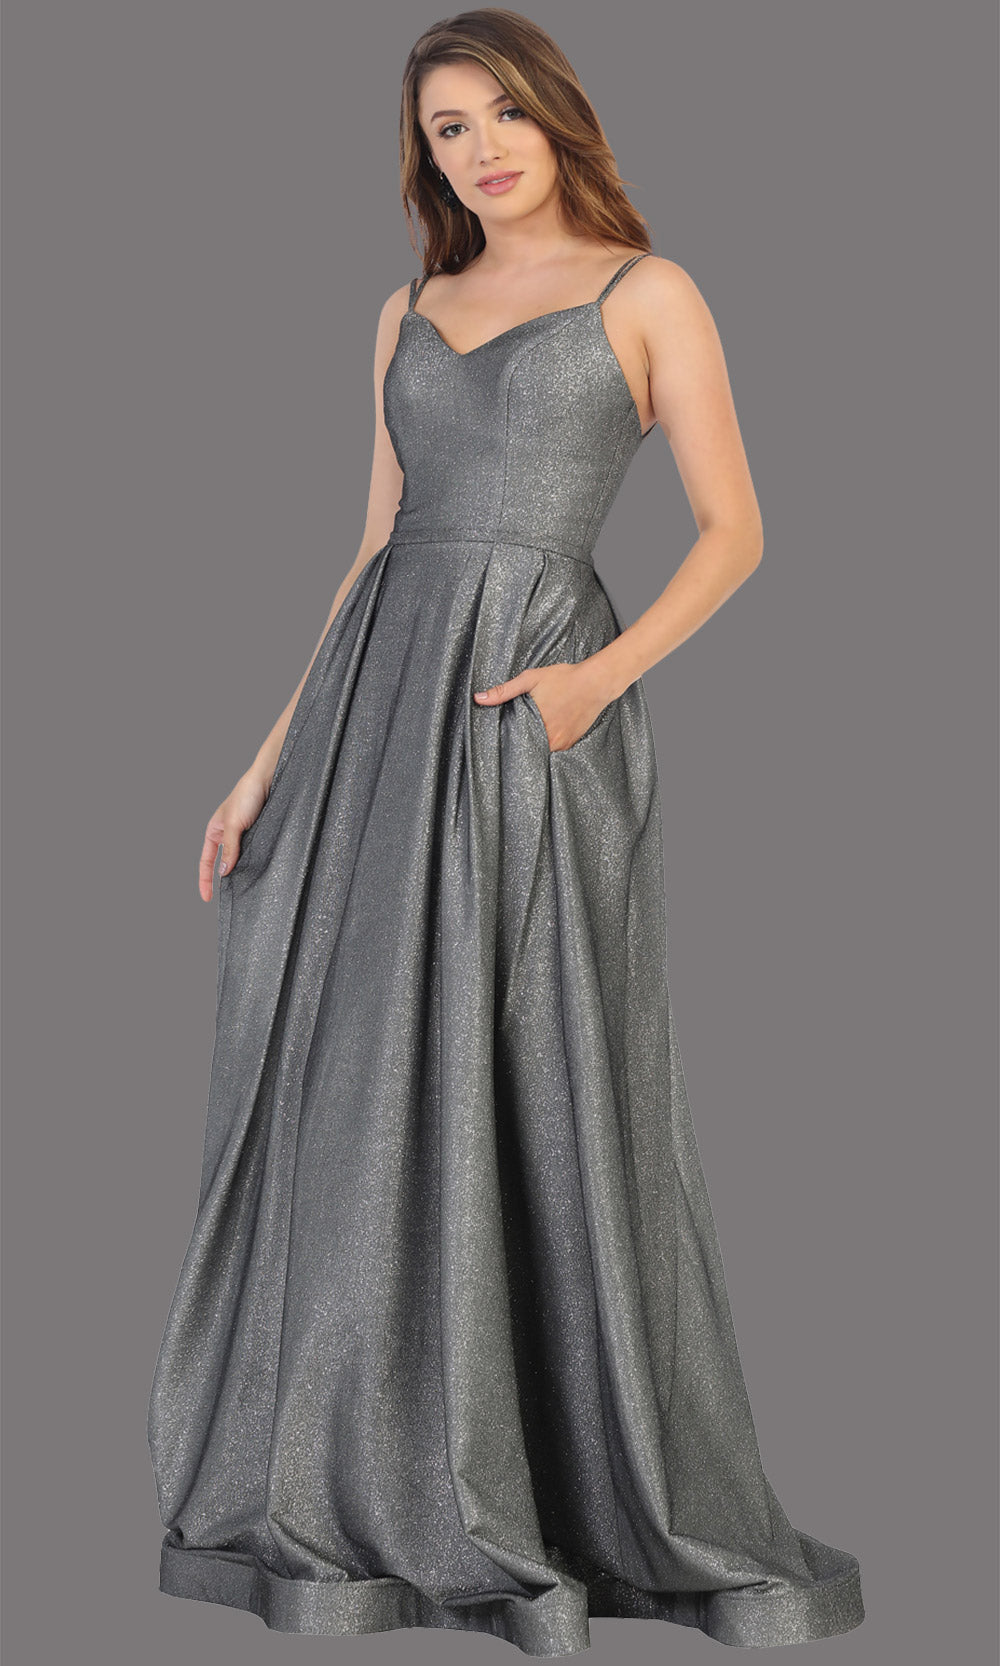 Mayqueen MQ1731 long flowy metallic charcoal grey dress w/ thin straps. This metallic grey flowy, a-line evening dress is perfect as a formal wedding guest dress, sweet 16 dress, quinceanera dress, prom 2020 dress, debut, indowestern gown. Plus sizes